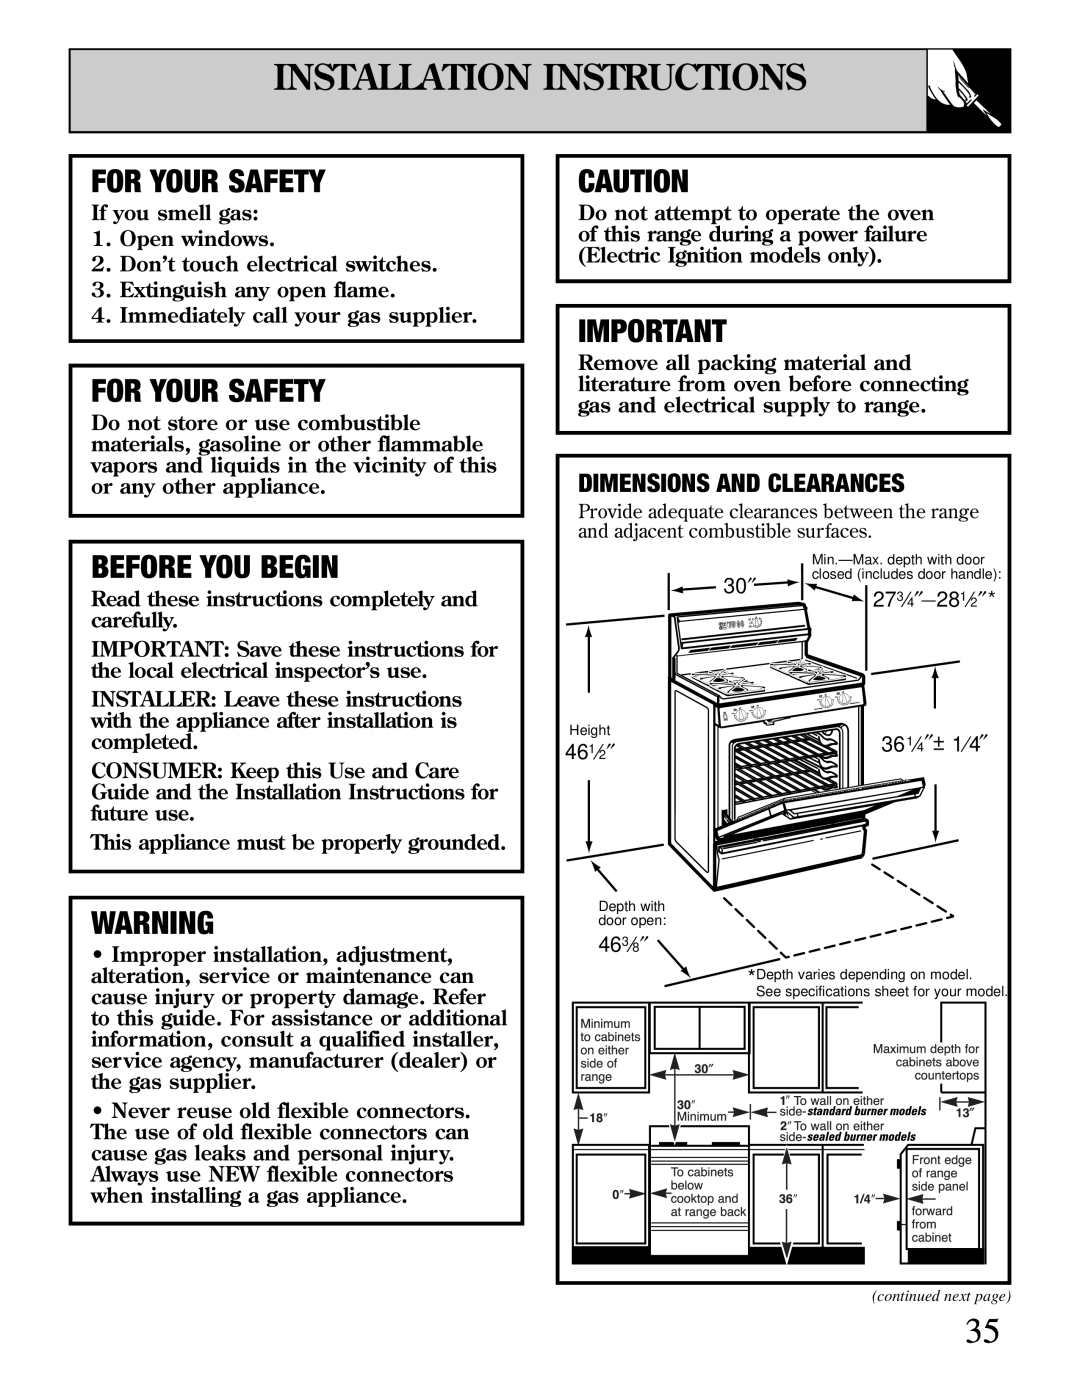 GE JGBP40, EGR3001, JR EGR3000 manual Installation Instructions, For Your Safety, Before You Begin, Dimensions And Clearances 